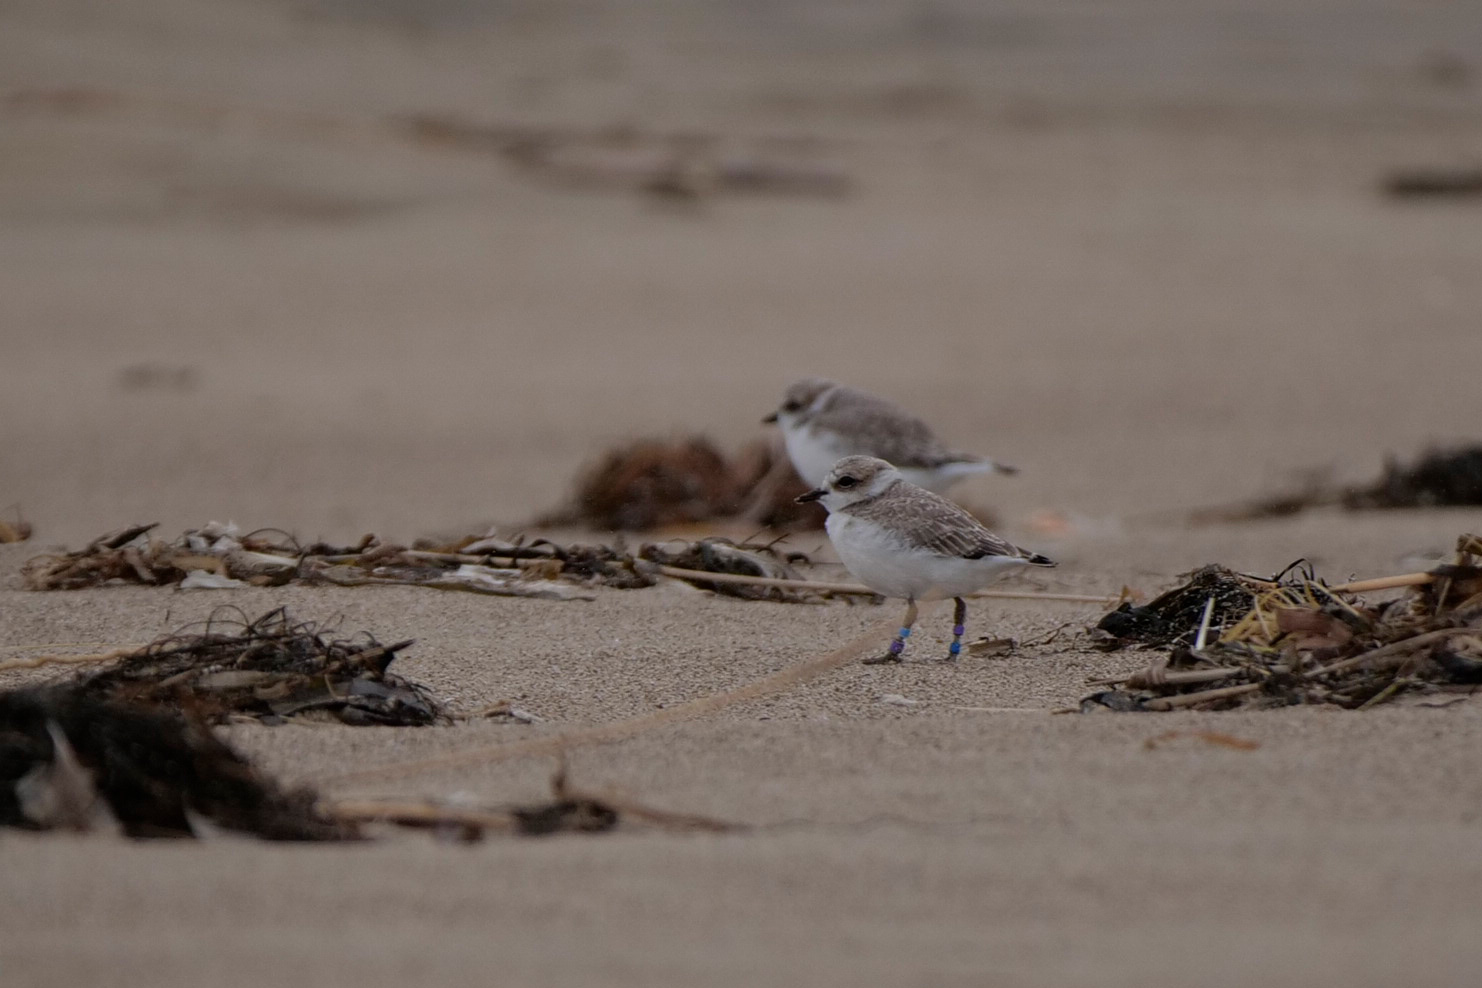 A photo of two small grayish-brown shorebirds standing close to one another on a sandy beach among washed up kelp.